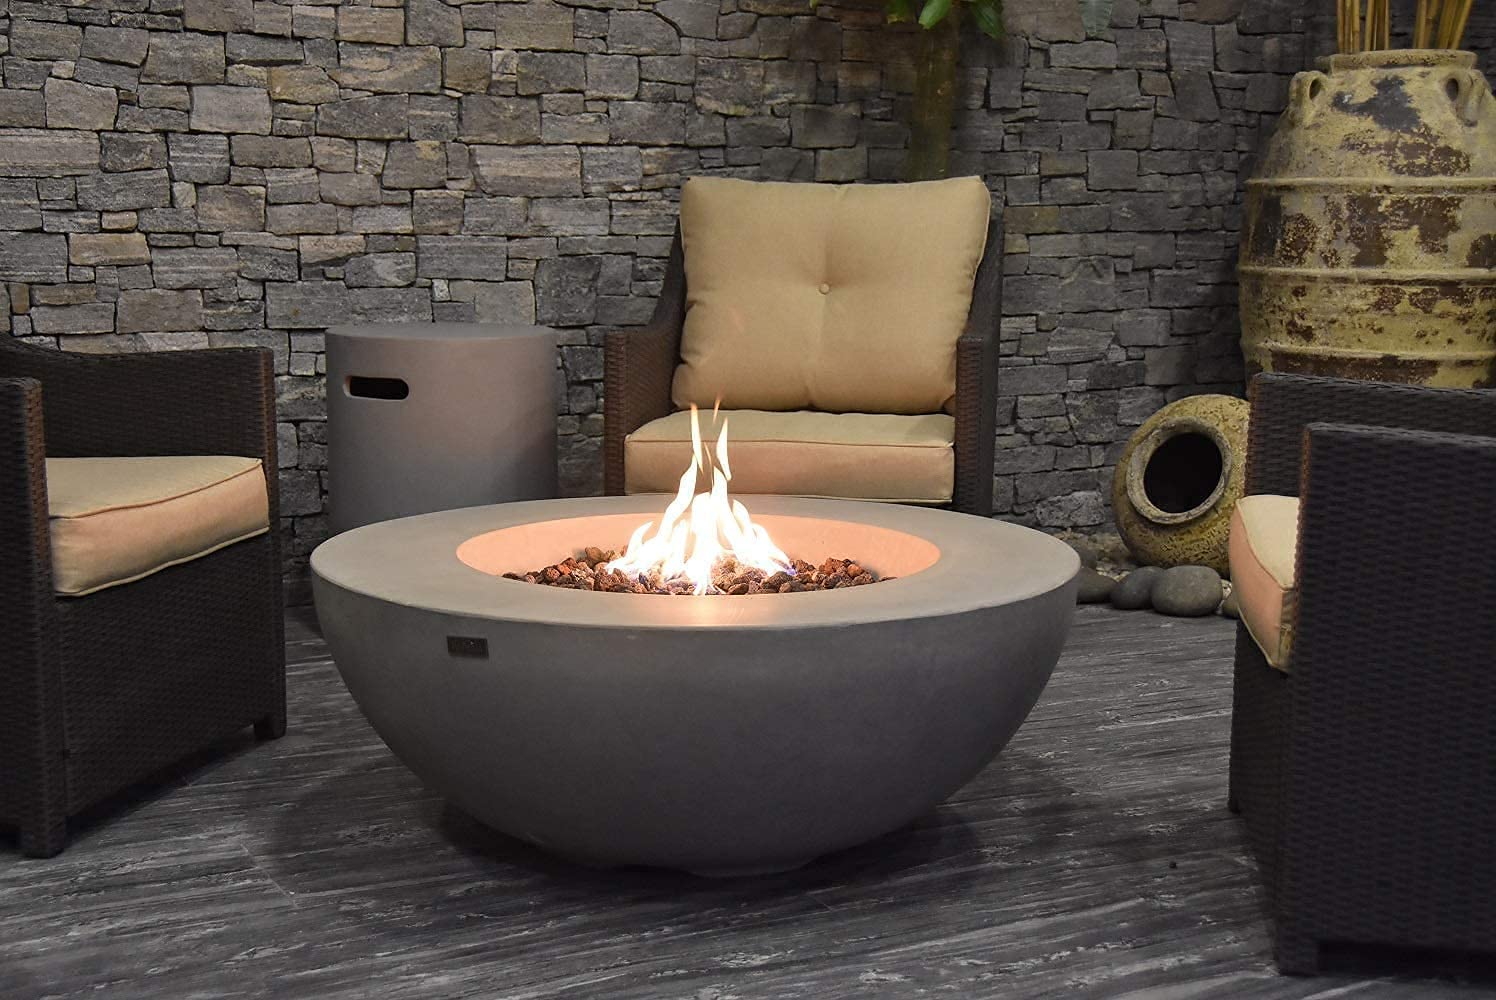 Key Points to Check before Purchasing Wholesale Outdoor Fire Pits From China